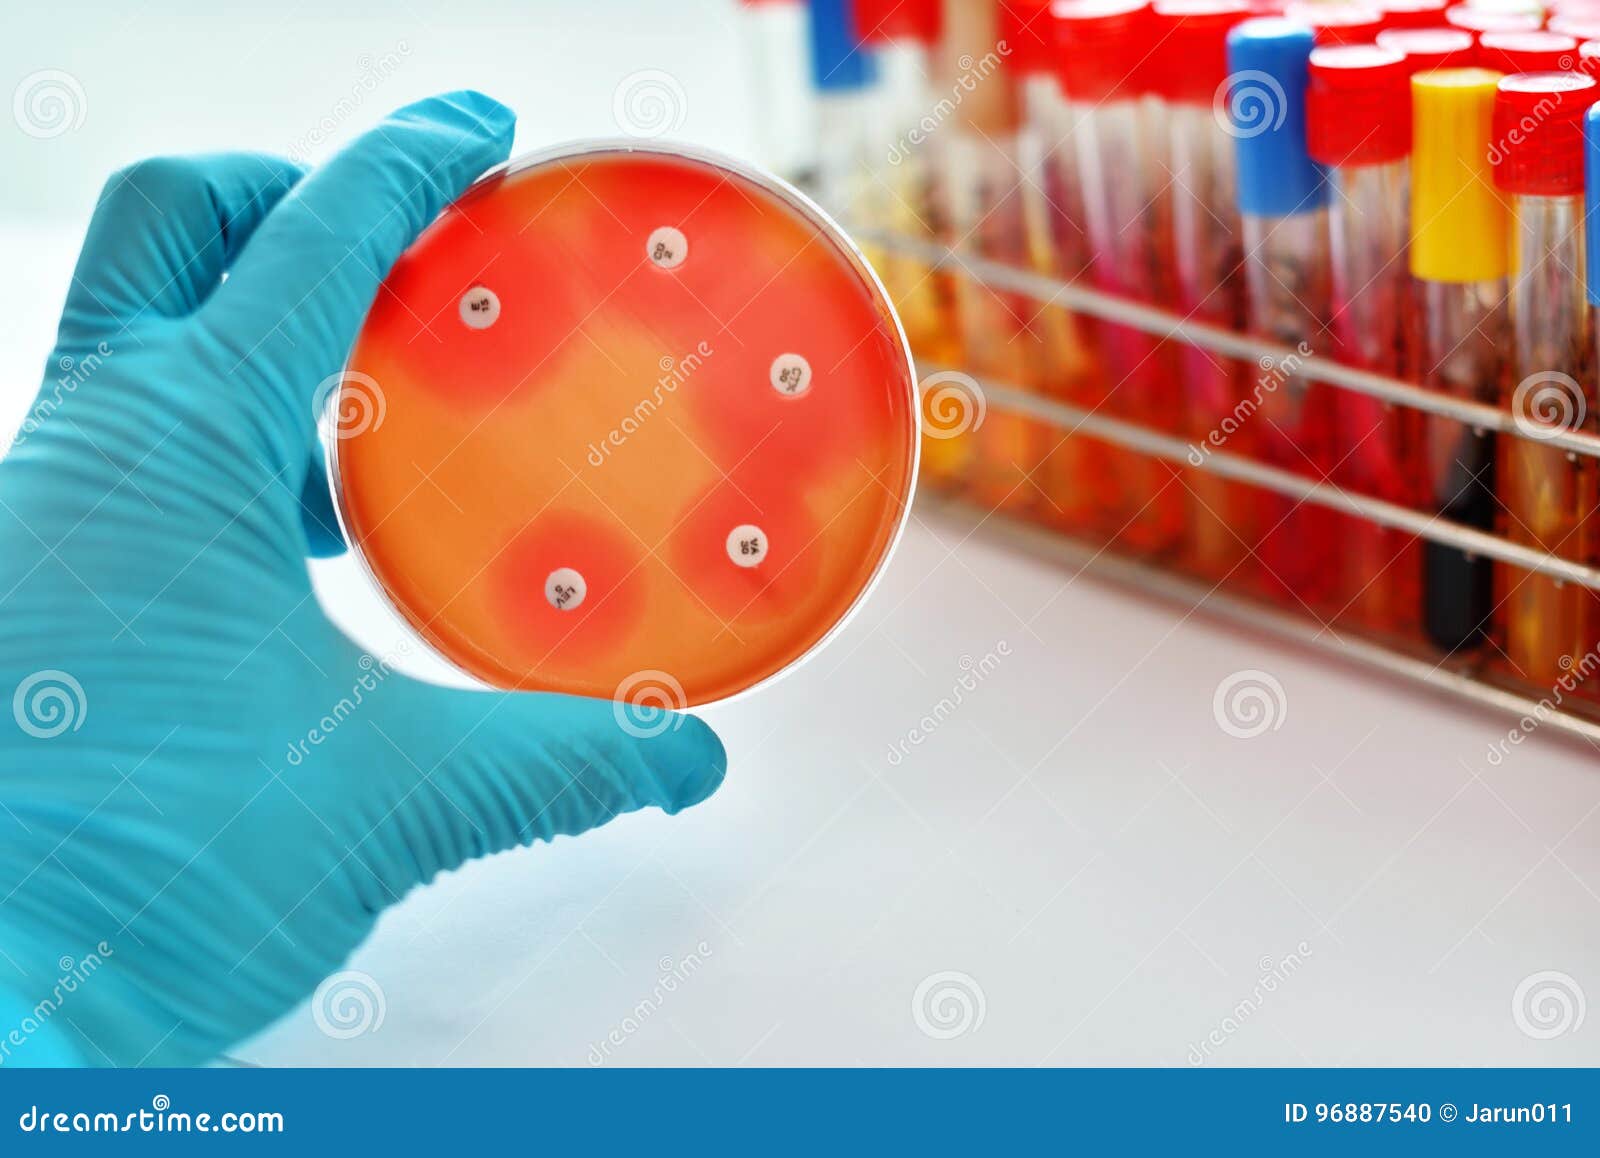 antimicrobial susceptibility test